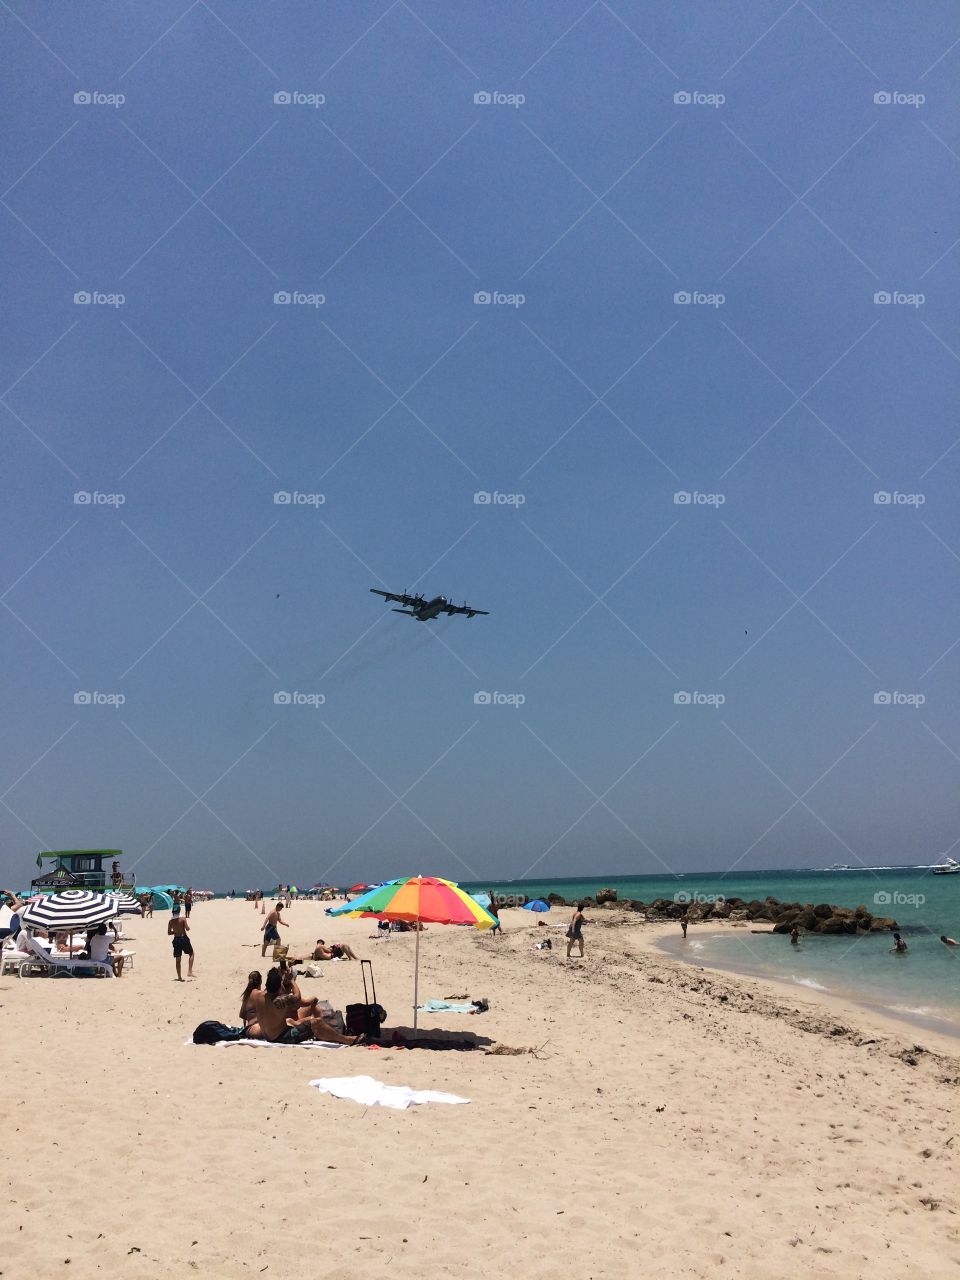 Airplane over the beach